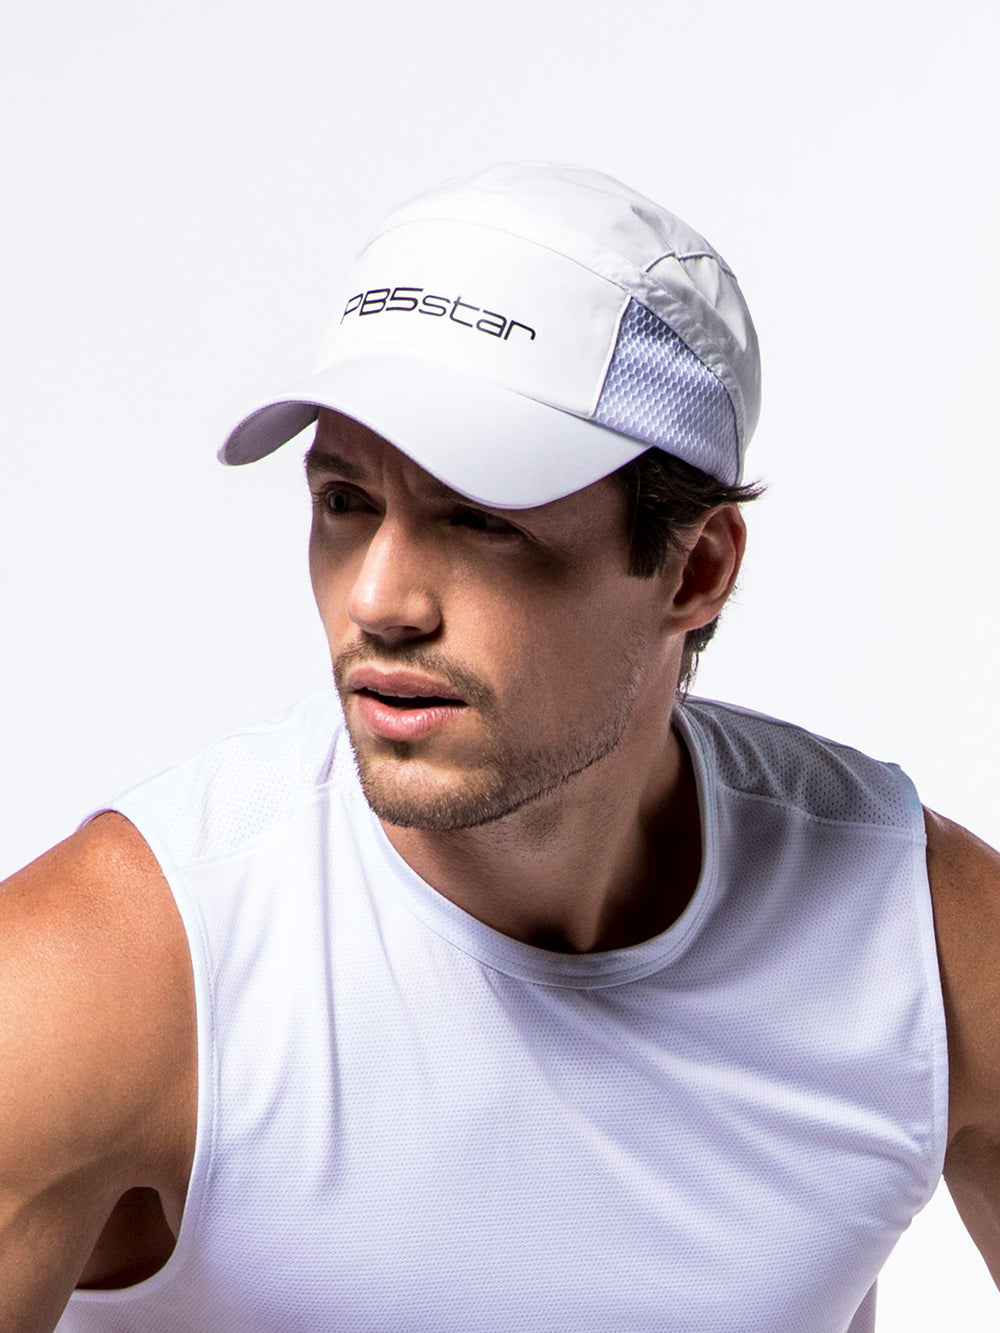 Athlete wearing a PB5star white signature cap with breathable mesh, ideal for active lifestyles and sports.